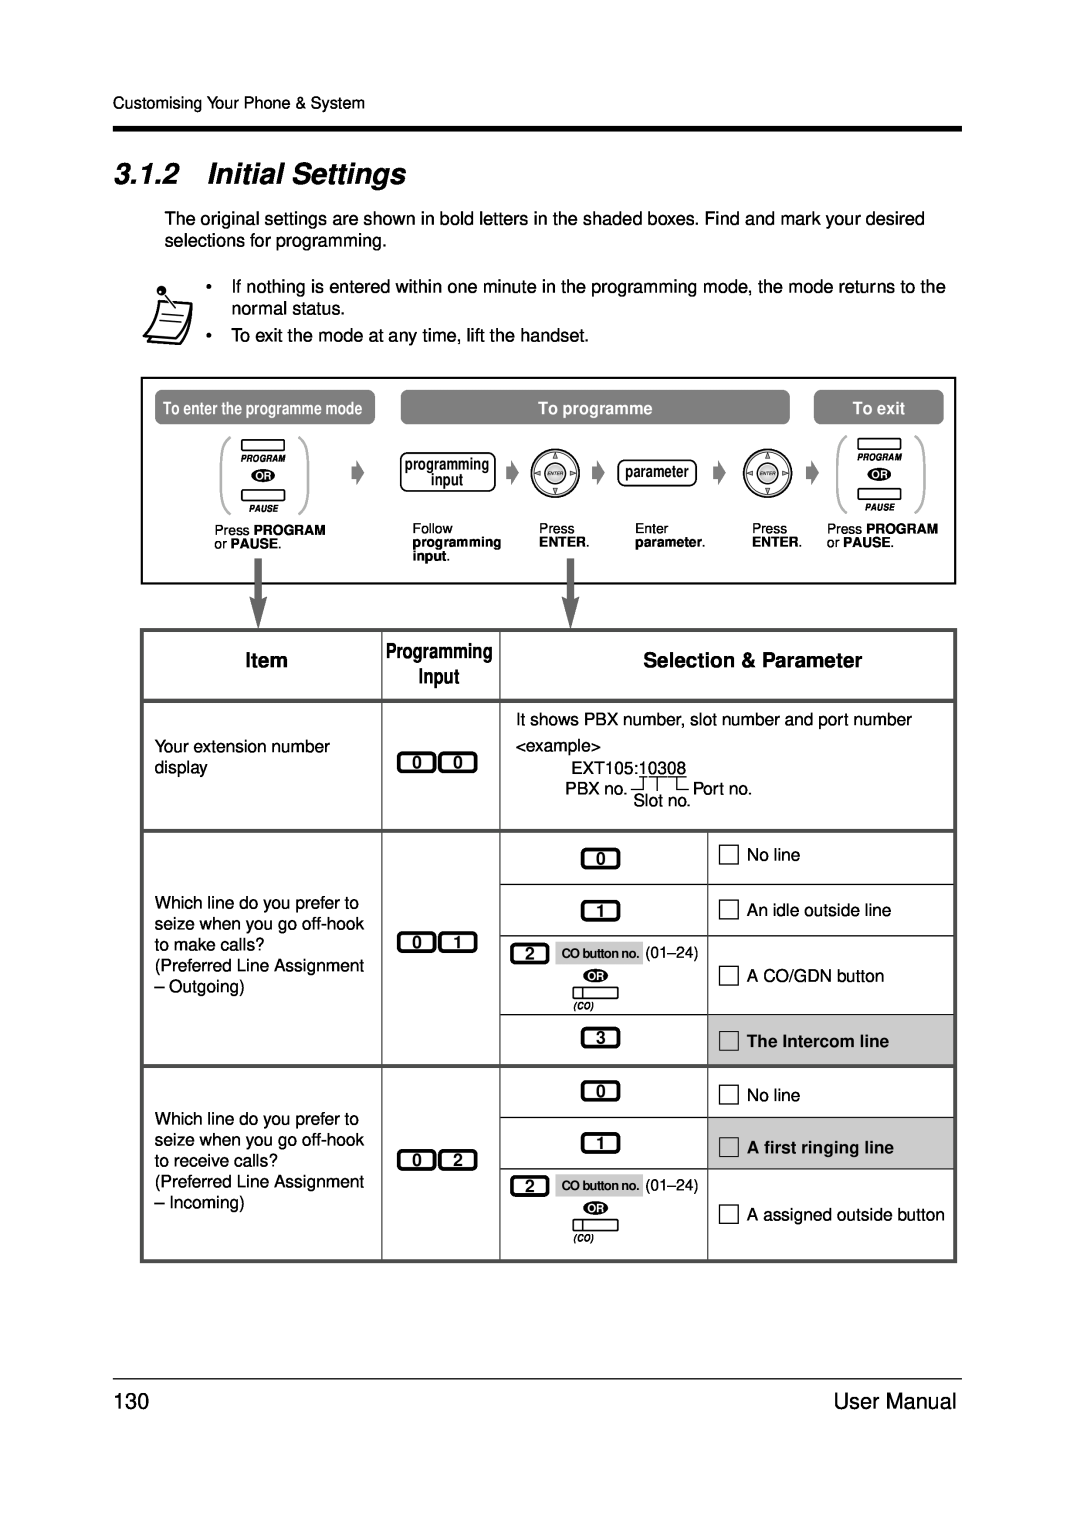 Panasonic KX-TDA200 user manual 3.1.2Initial Settings, To programme, The Intercom line, A first ringing line 